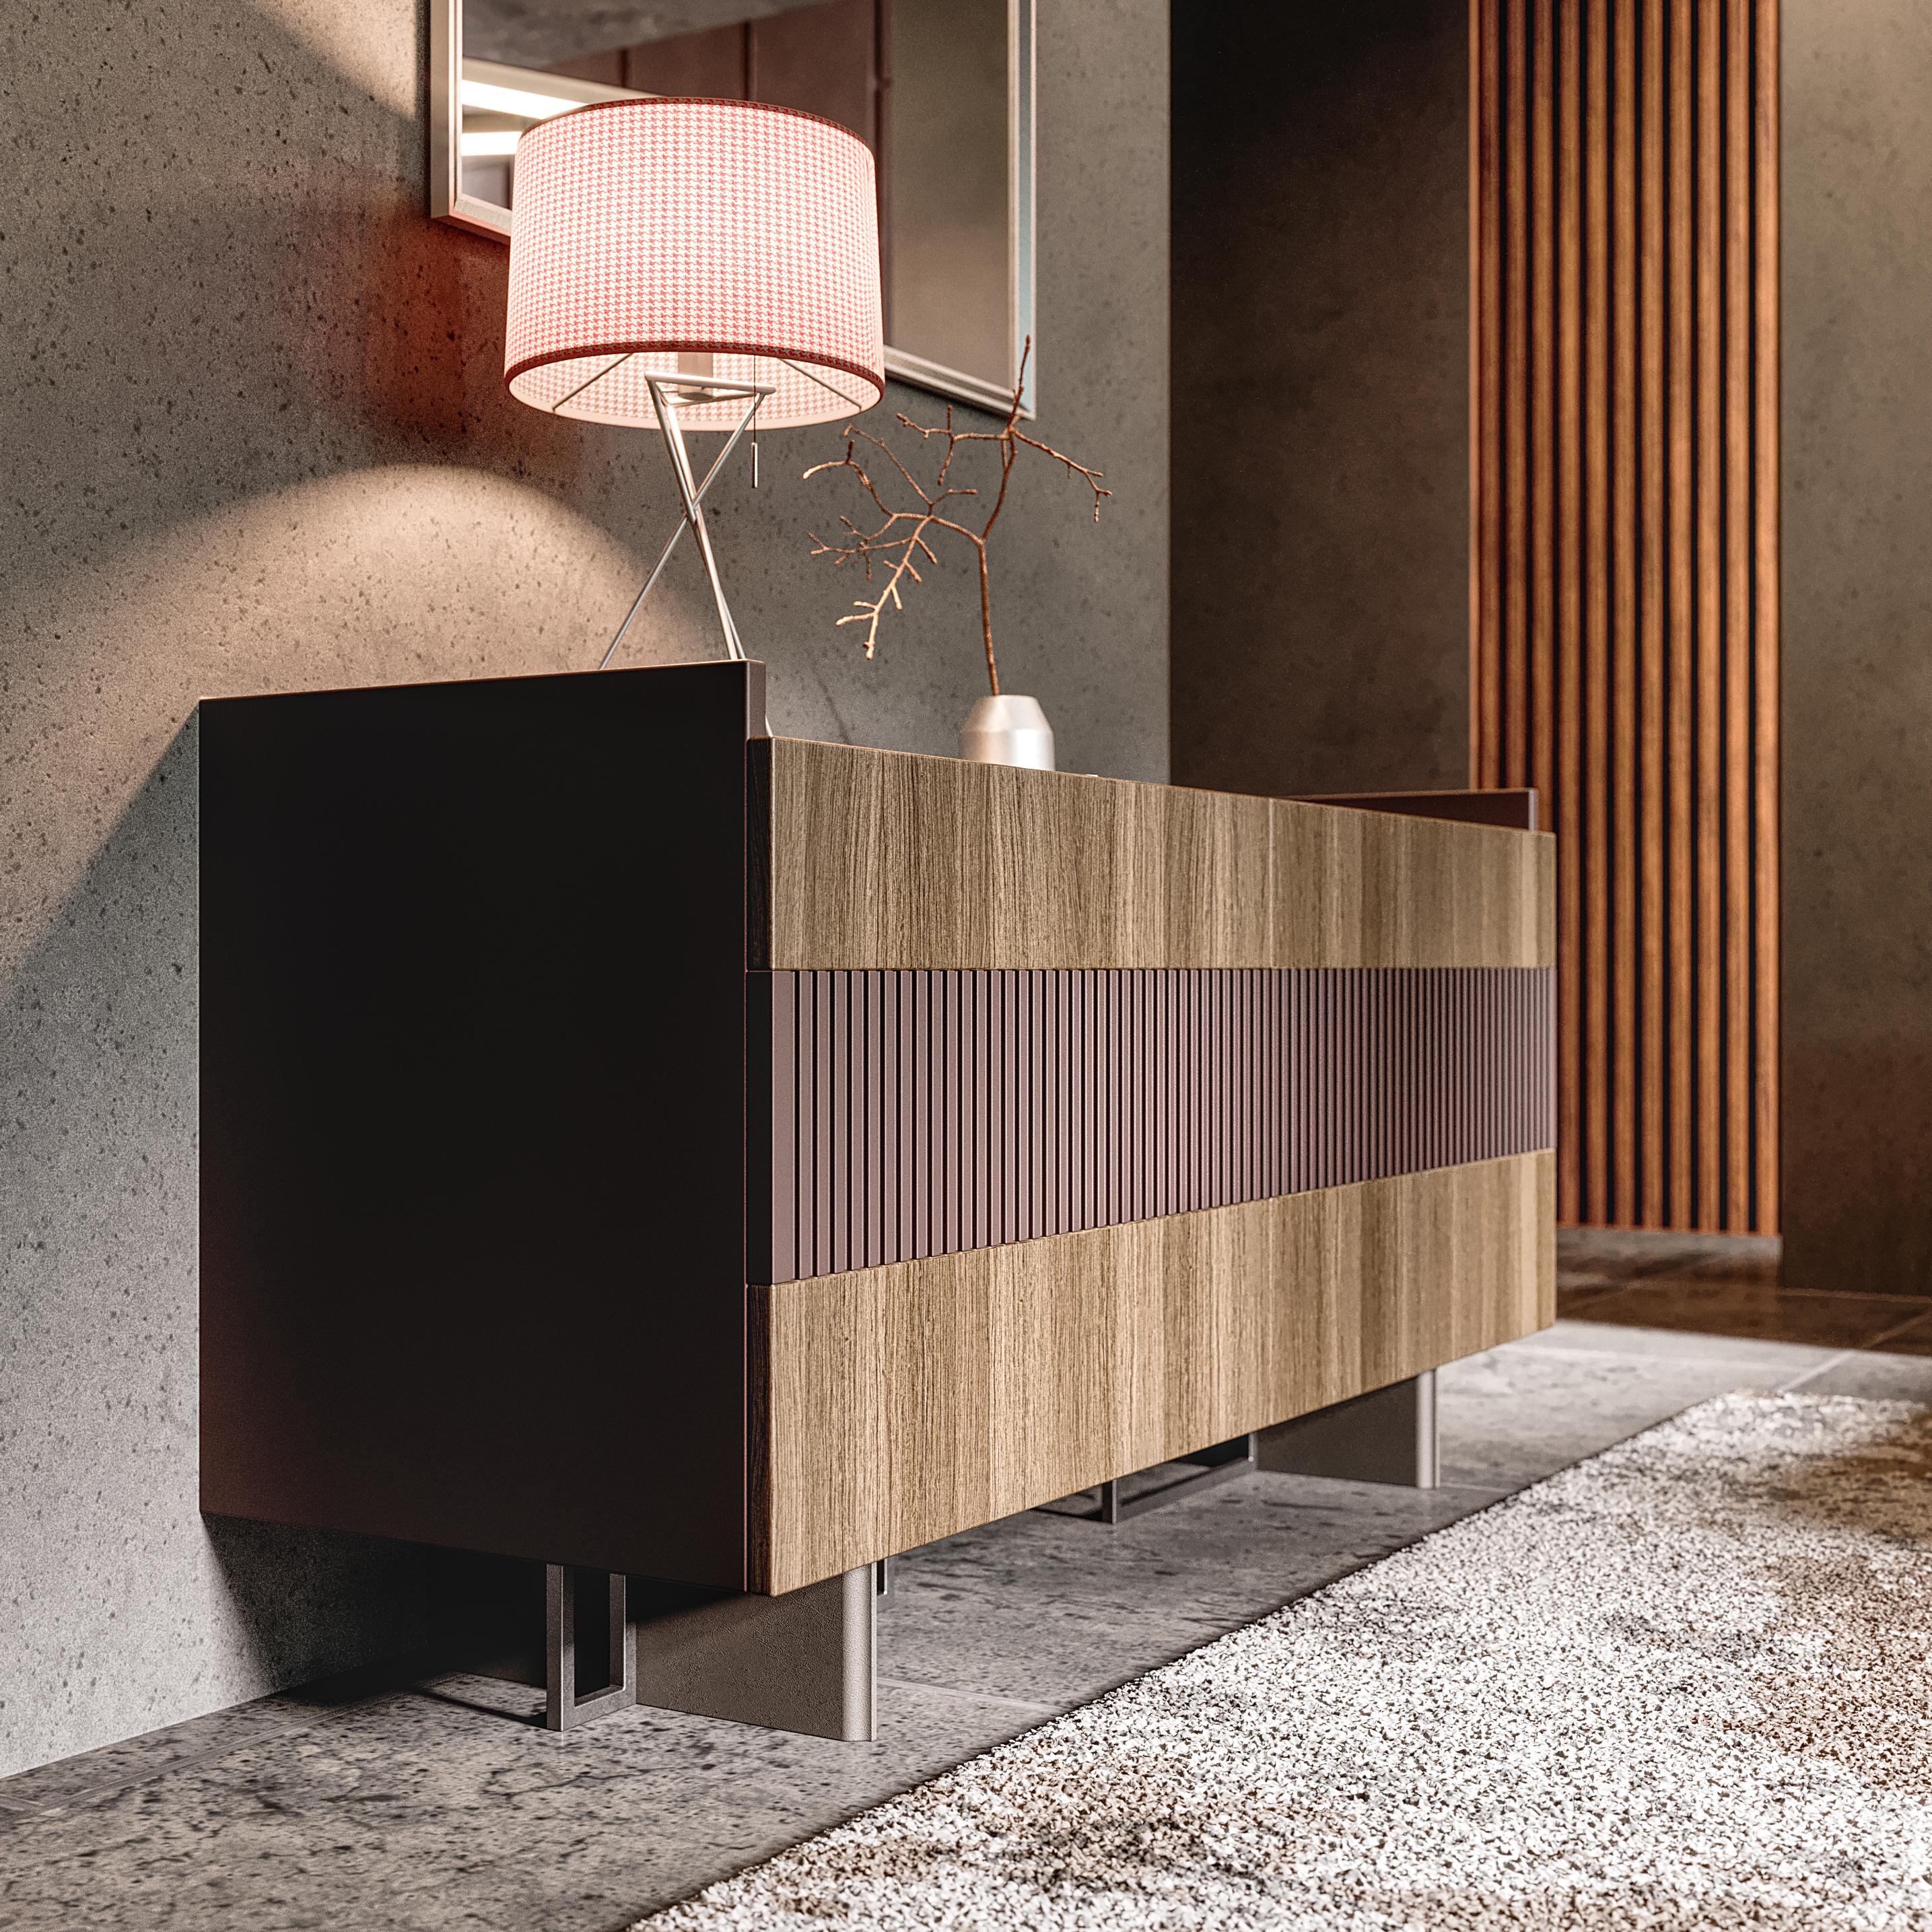 Minimal and contemporary lines, our Keith storage cabinet encapsulates the concepts of form and function. A valuable decorative element that softens the rigorousness of the surrounding elements. Elegant and essential for practical and refined